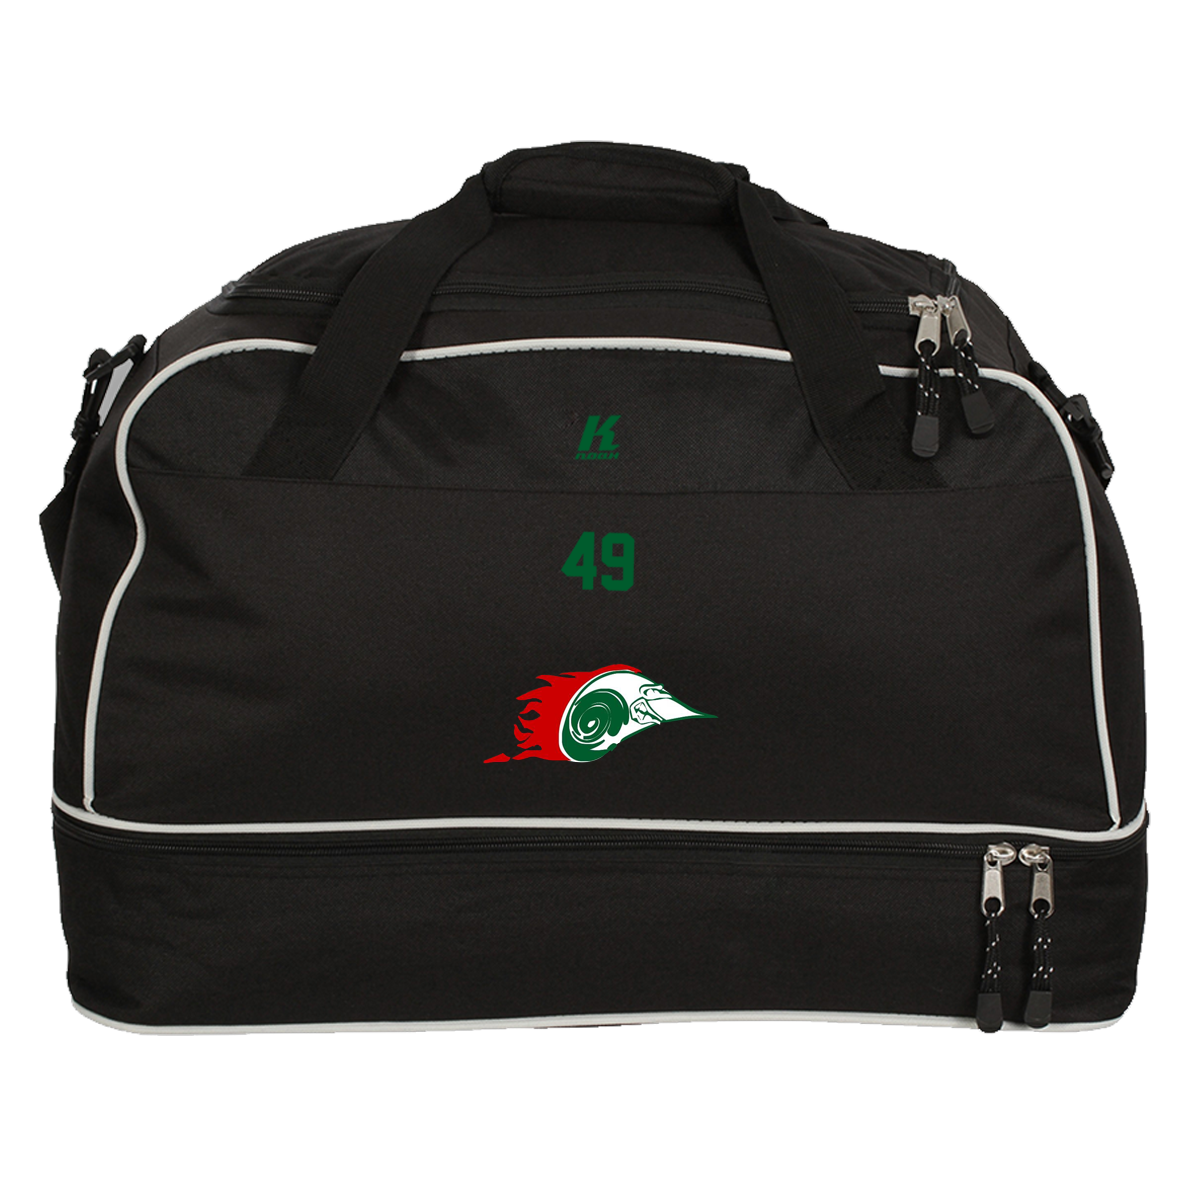 X-Press Players CT Bag with Playernumber or Initials